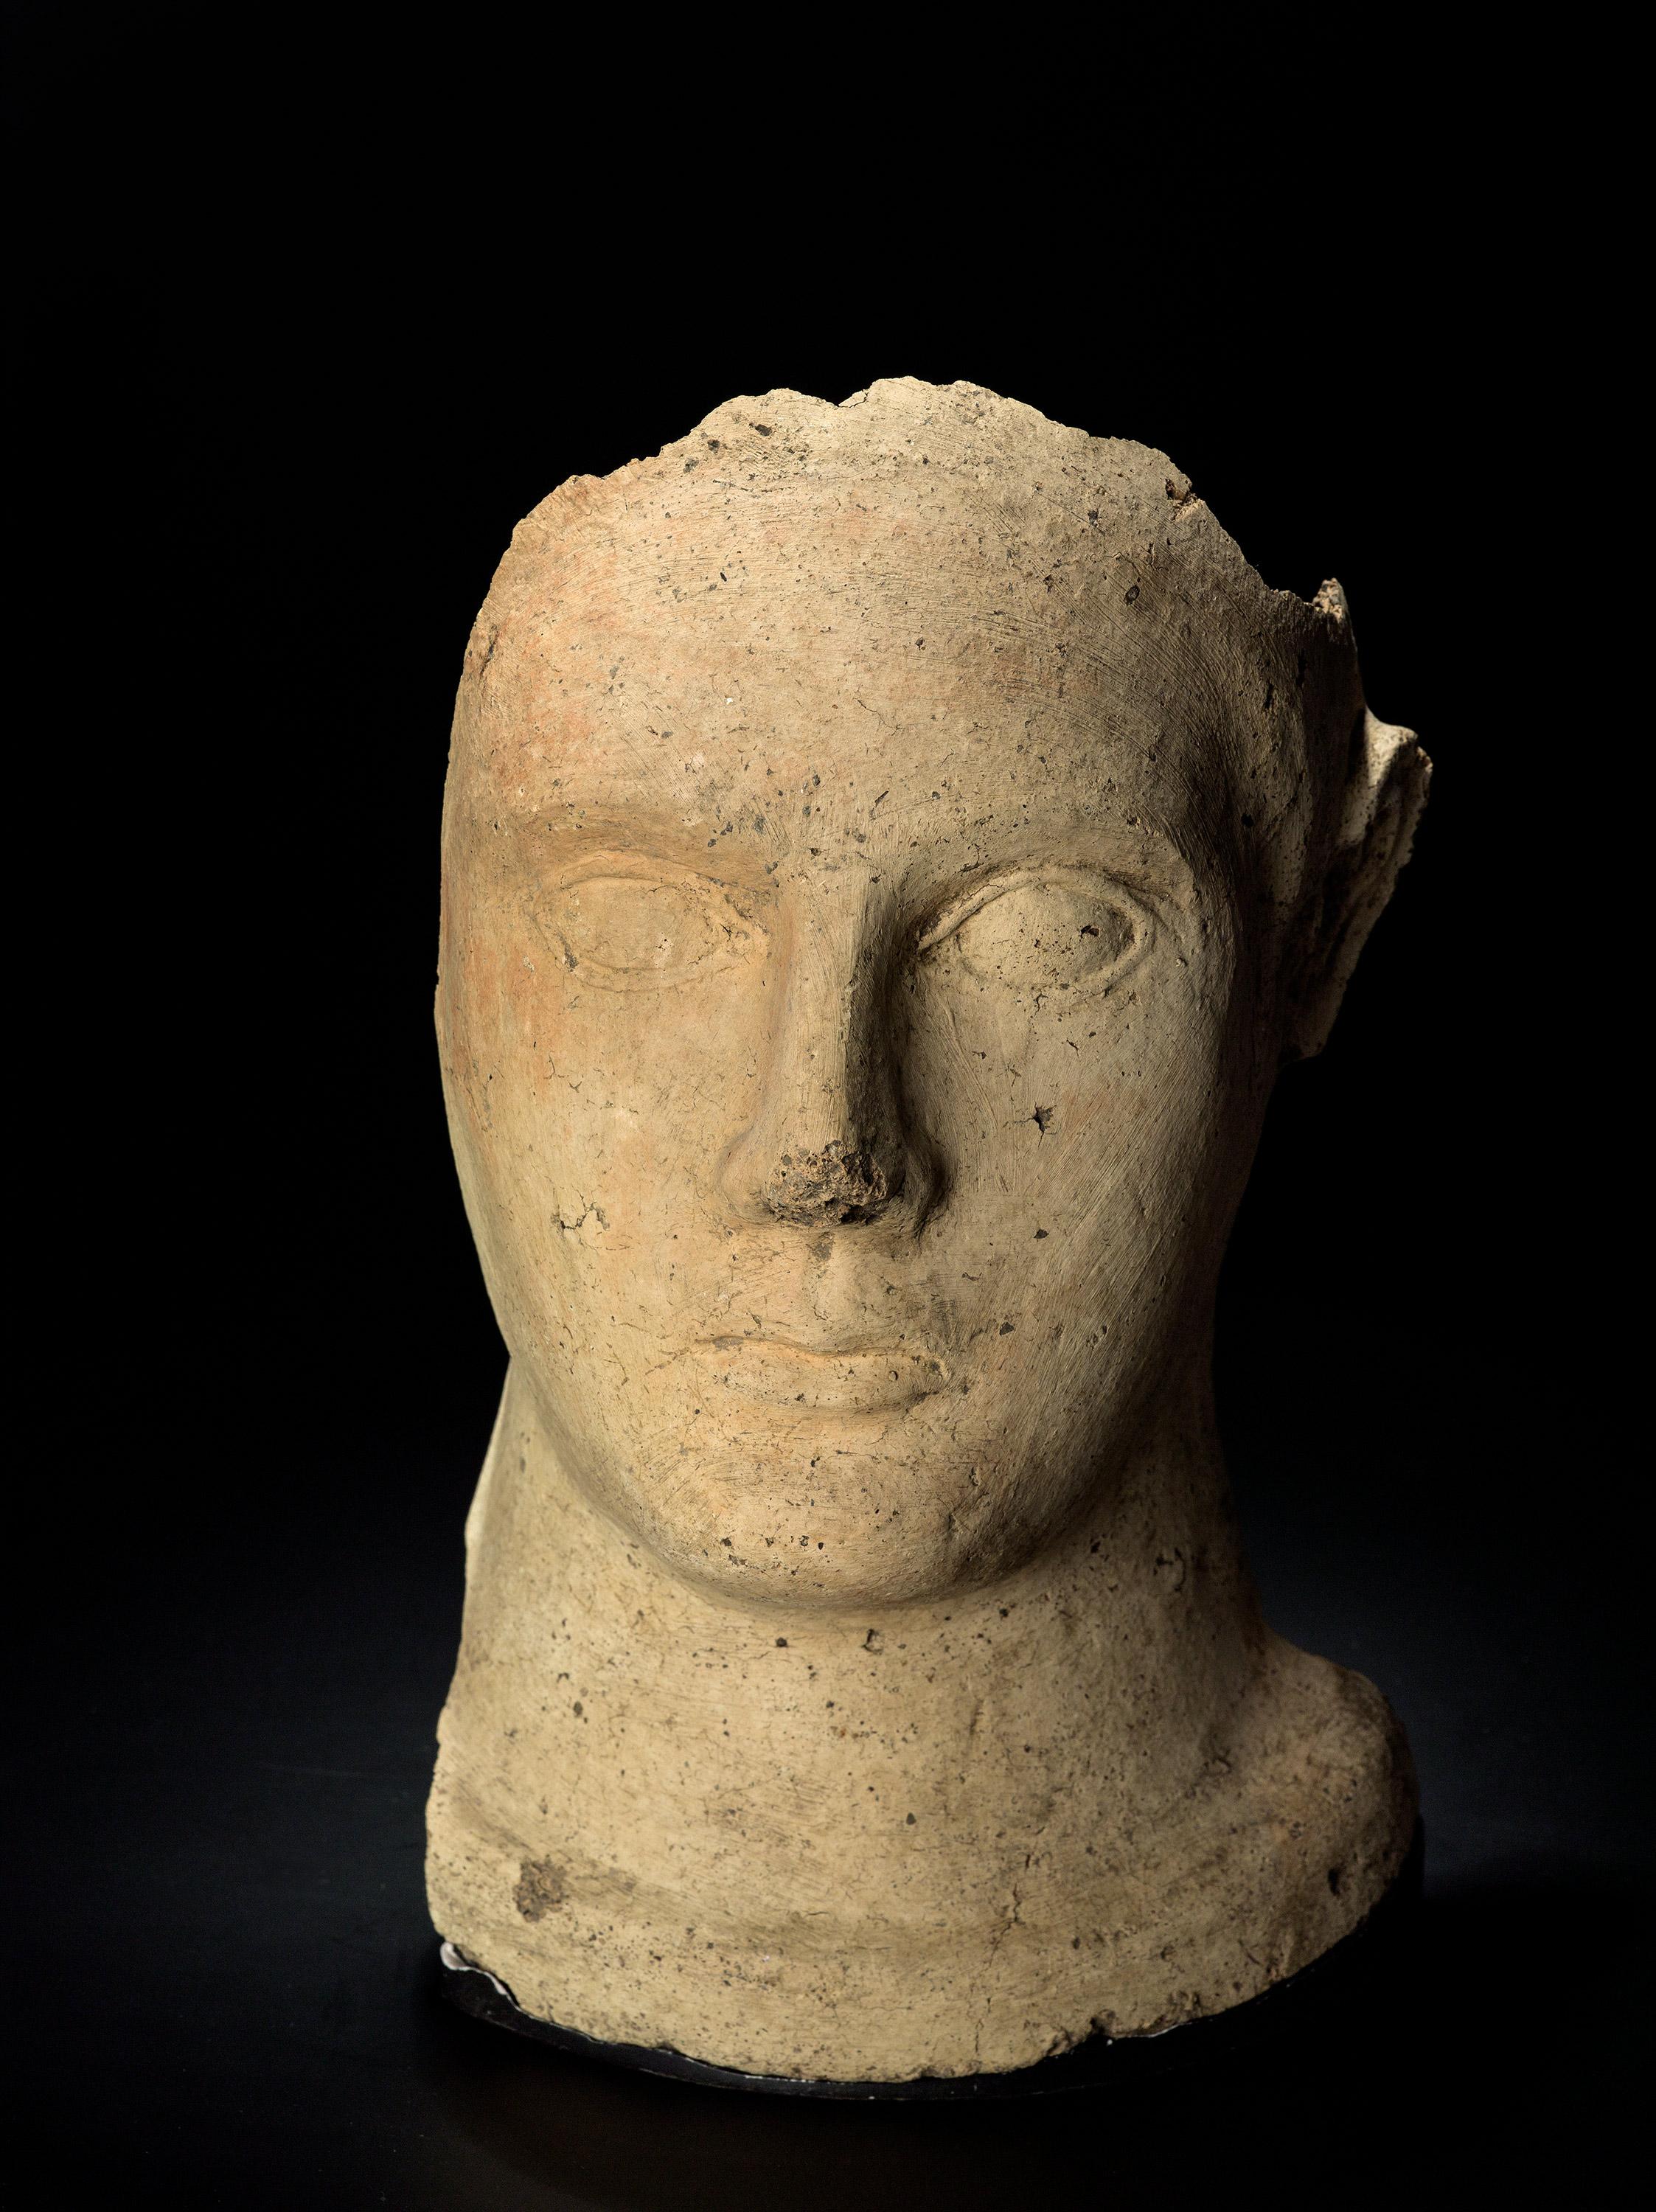 This fragment shows the frontal part of a male head with wide open eyes. The mouth is small which gives the face a severe and devote expression. The votive head is attributed to Veii, a walled Etruscan settlement on Isola Farnese that is situated